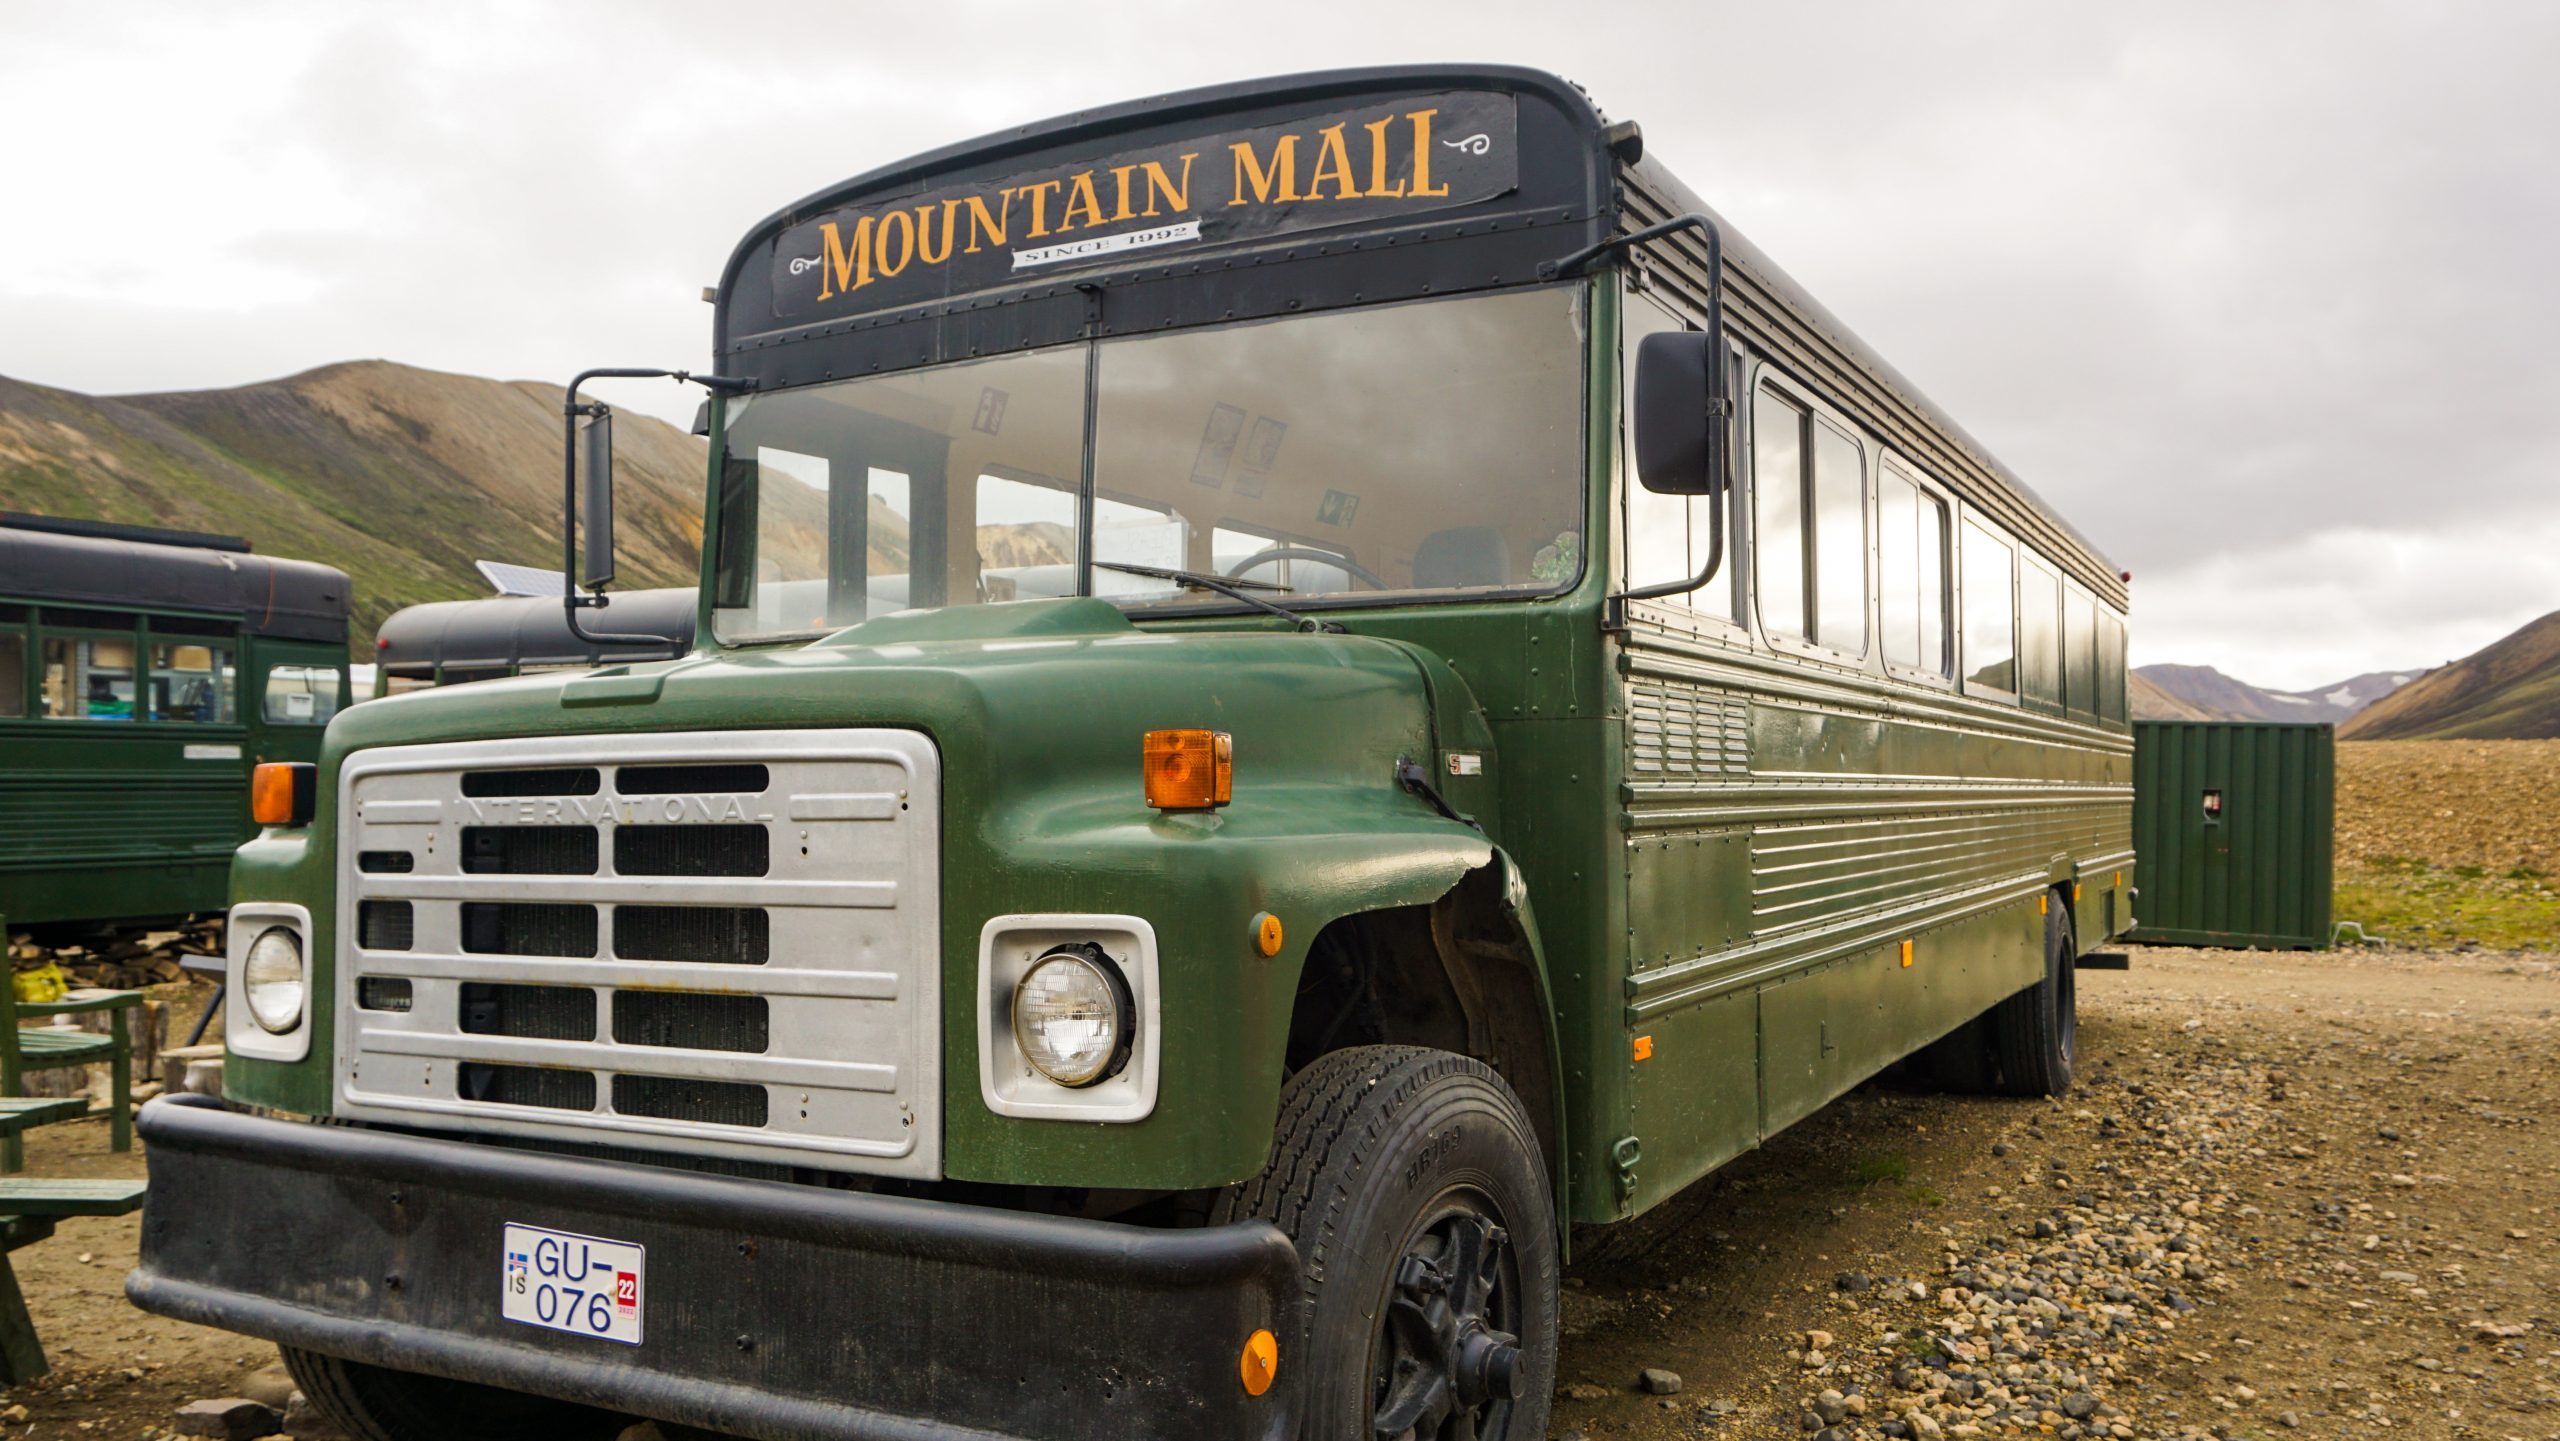 A green old bus with the sign "Mountain Mall"